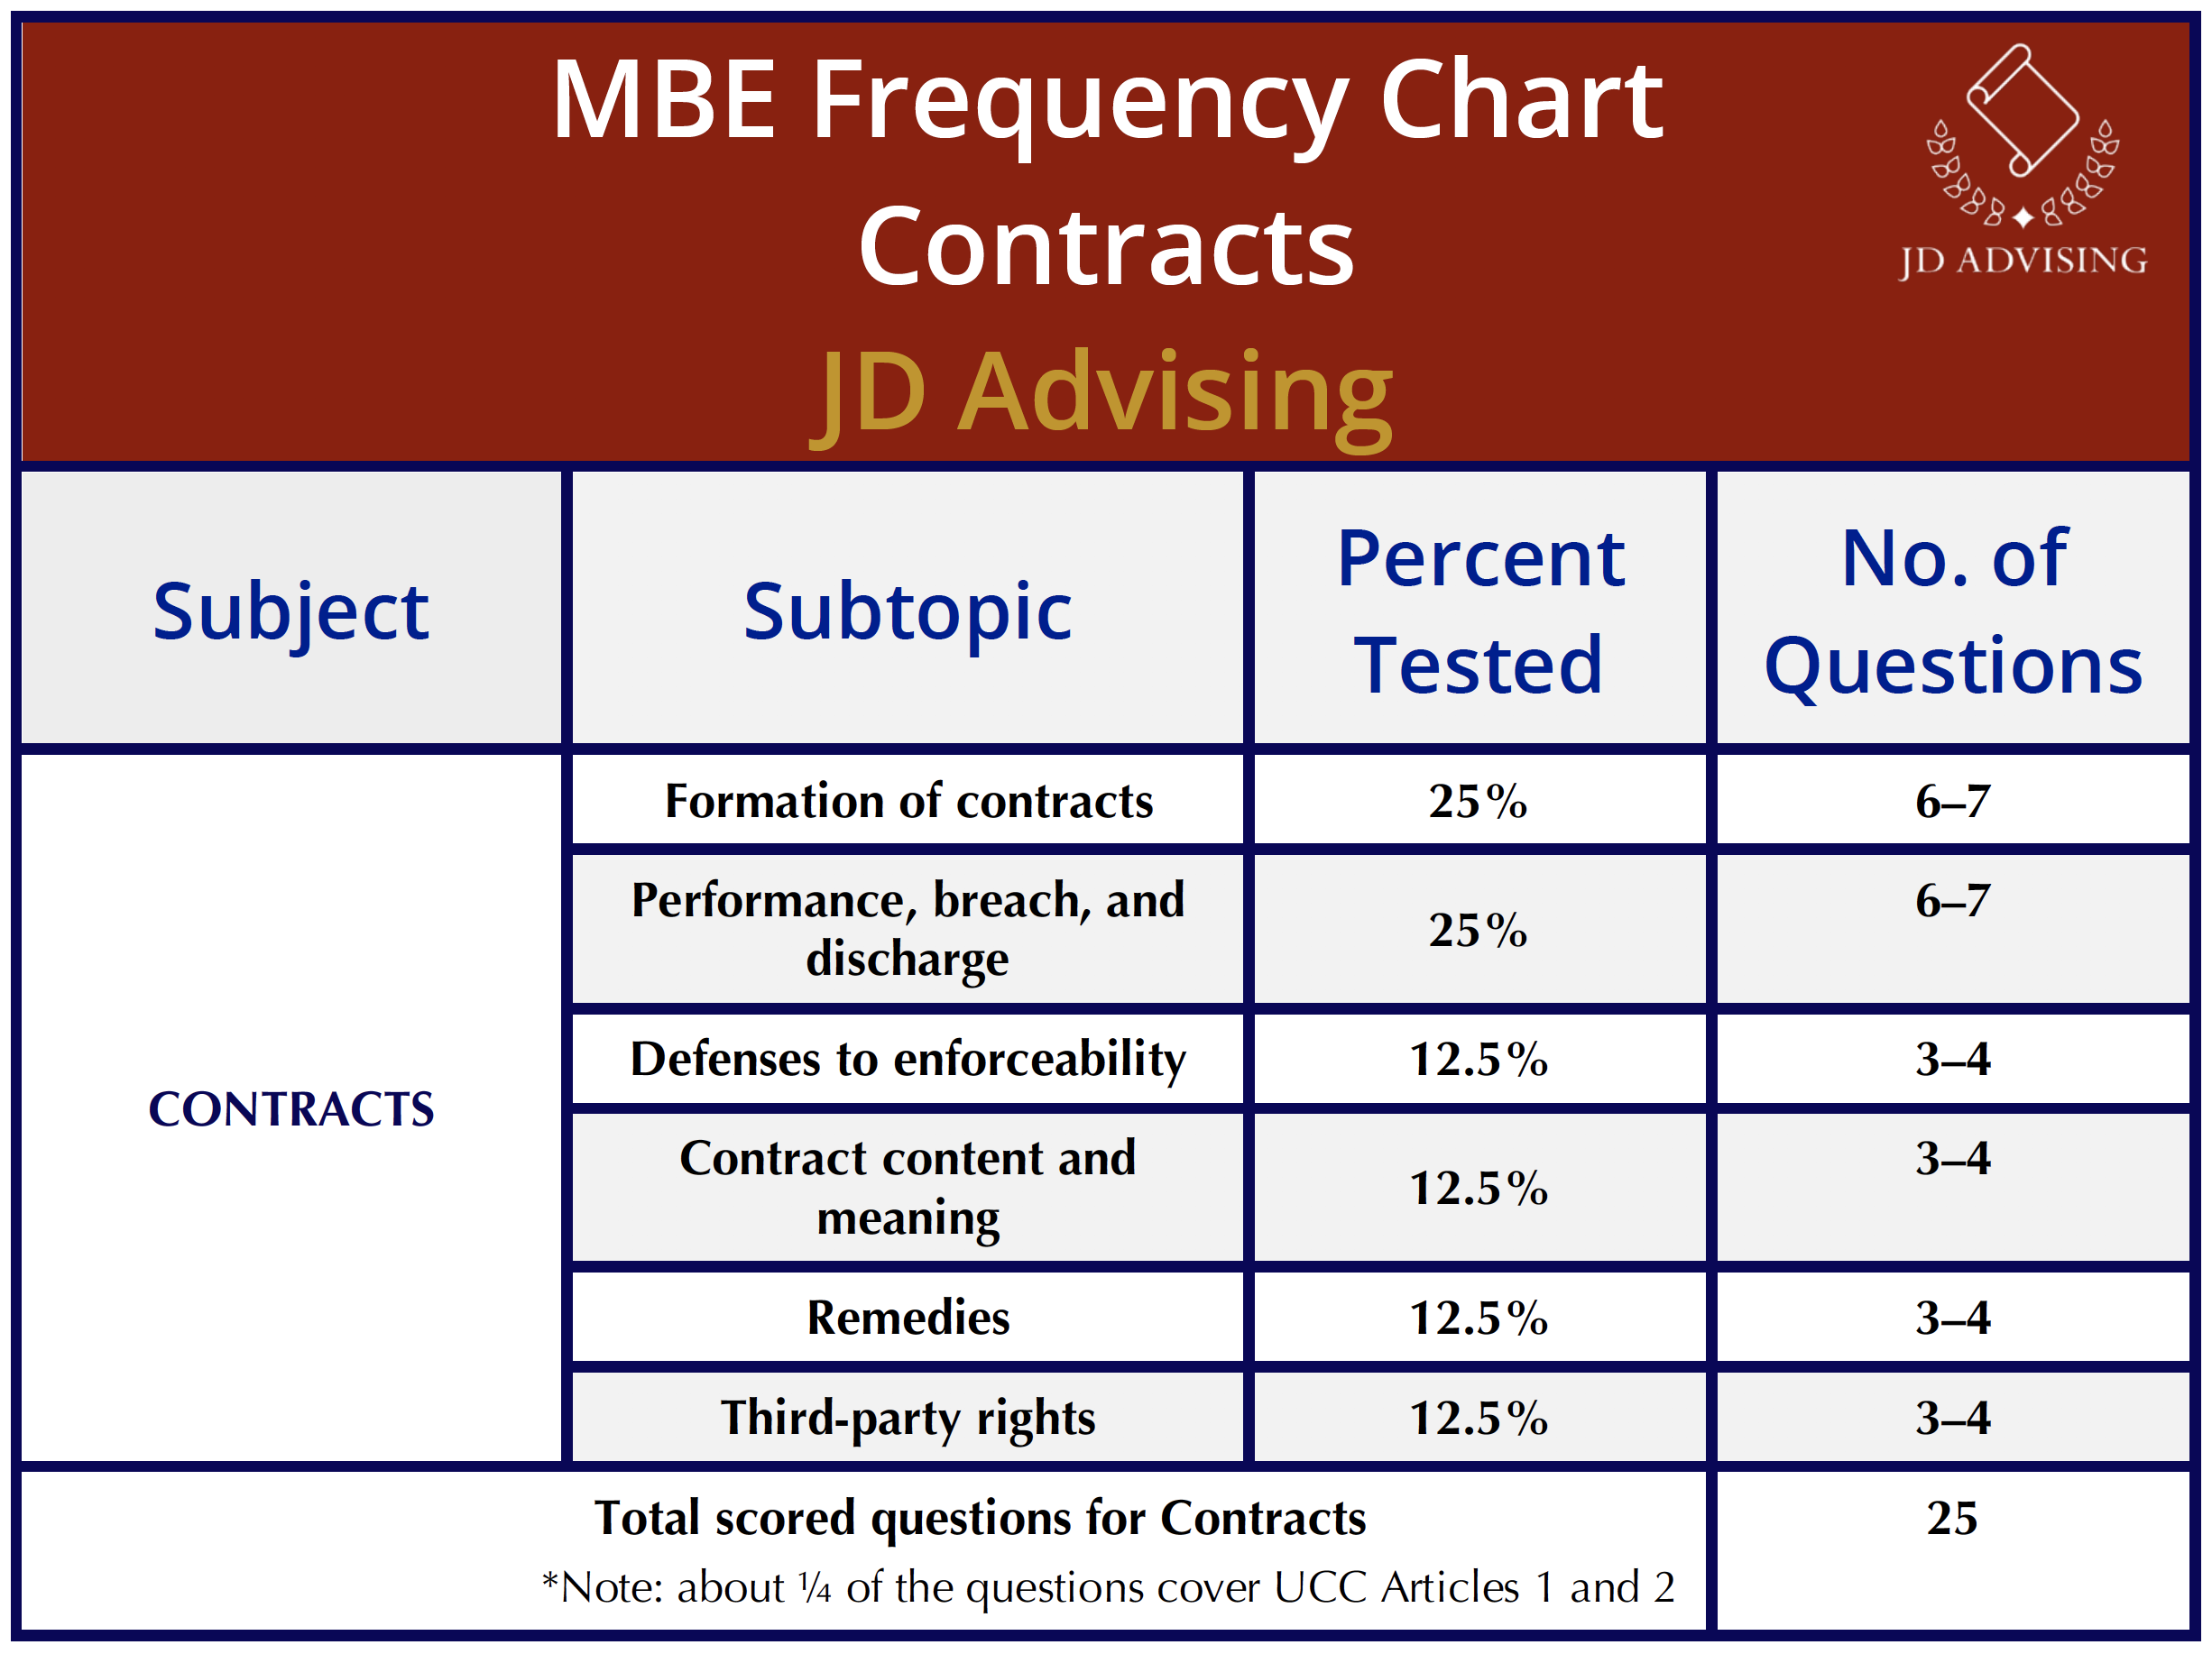 Contracts MBE frequency chart